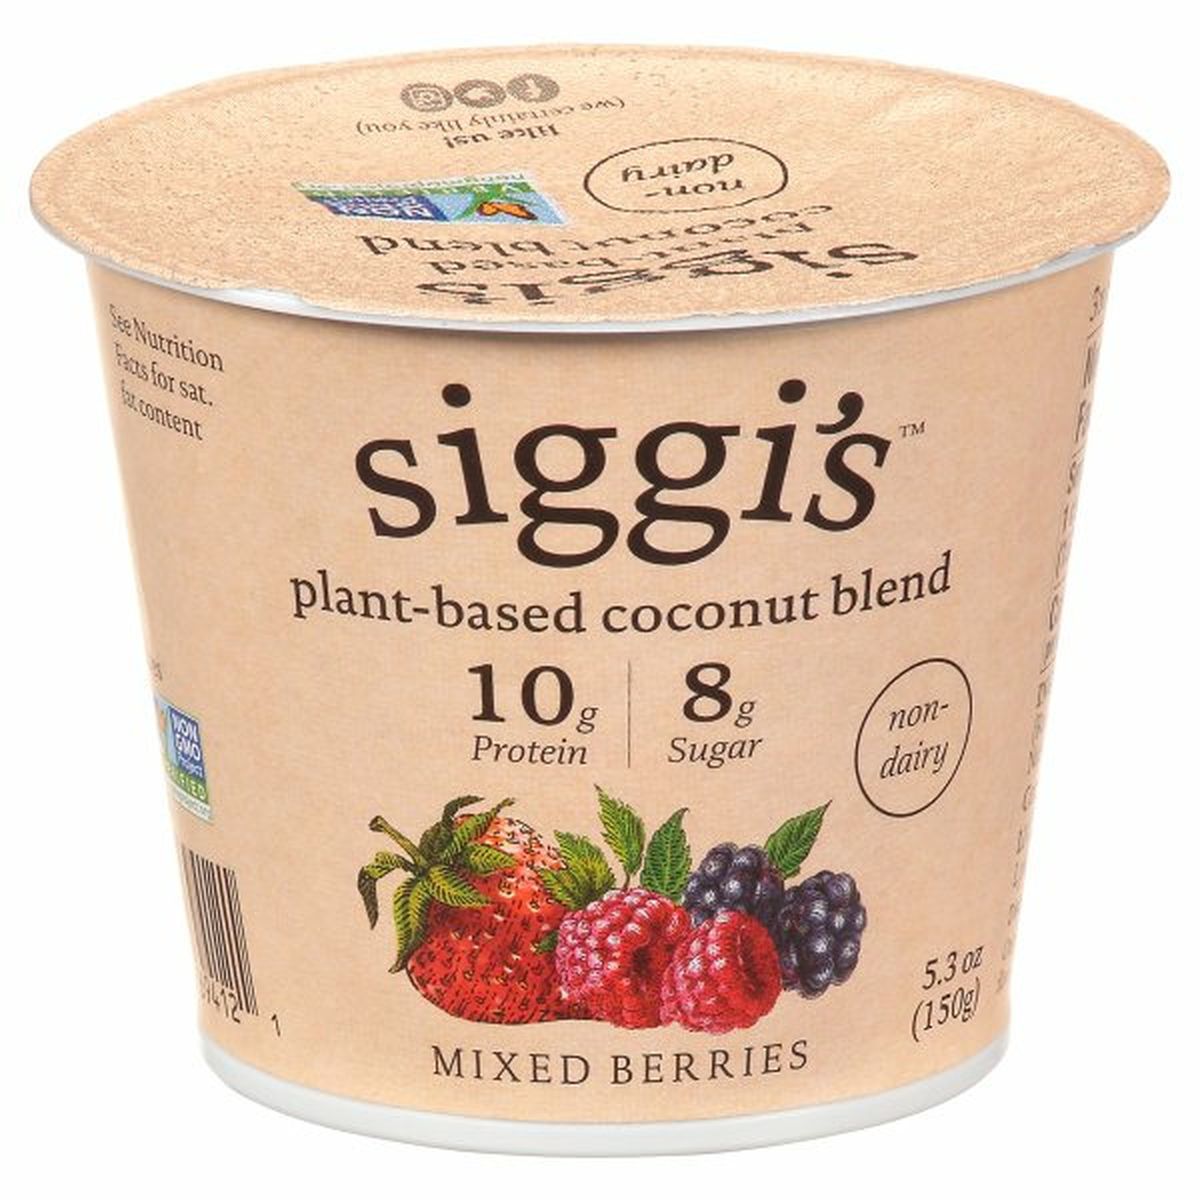 Calories in Siggi's Coconut Blend, Plant-Based, Mixed Berries